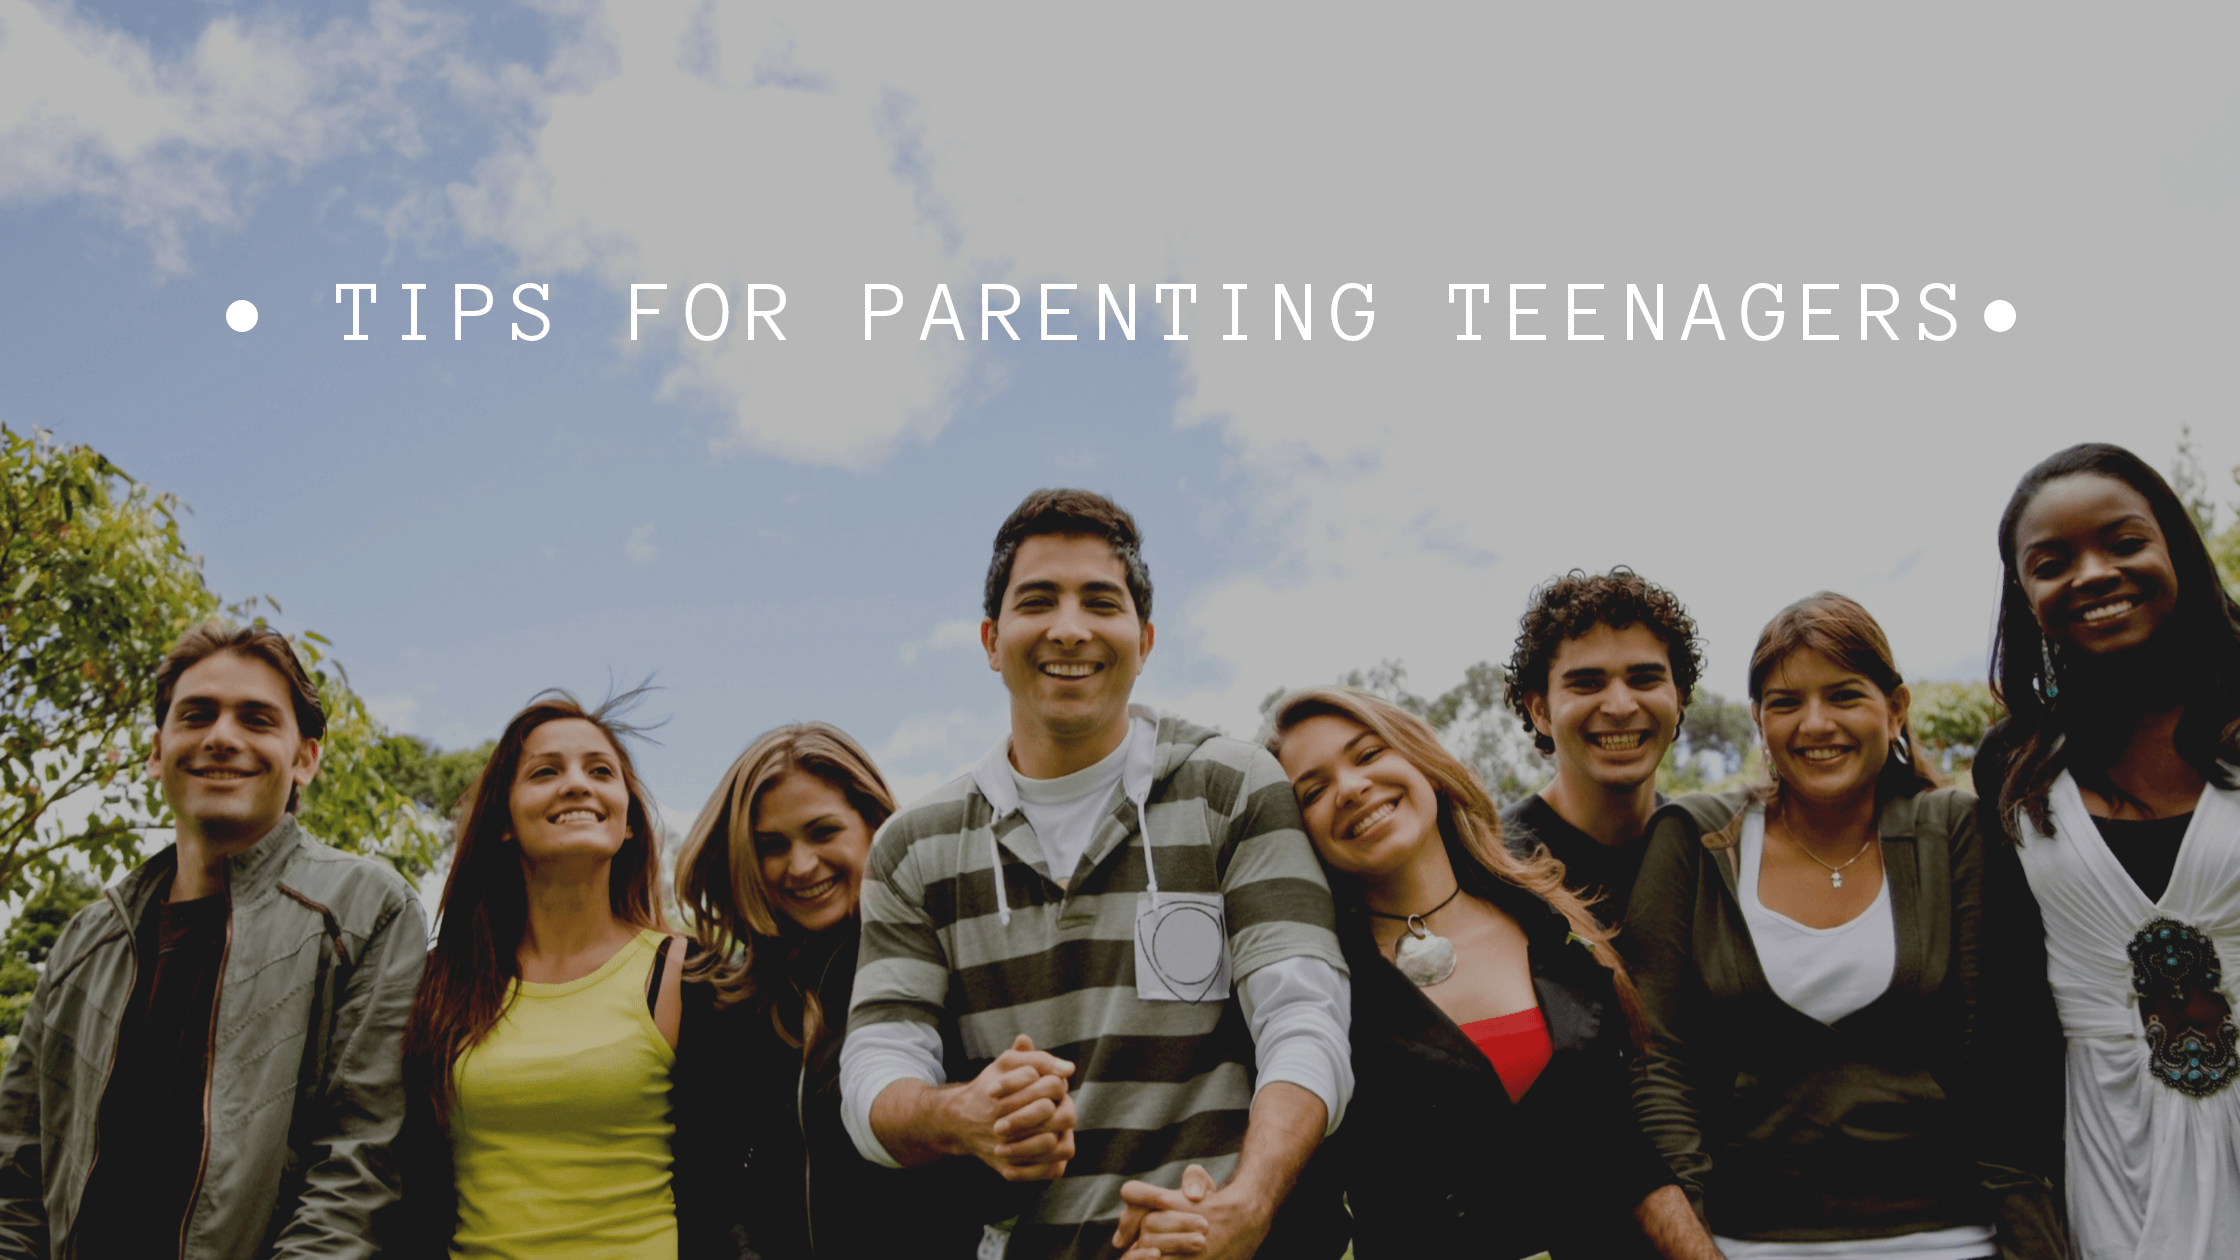 Group of teens-positive parenting strategies for the teenage years